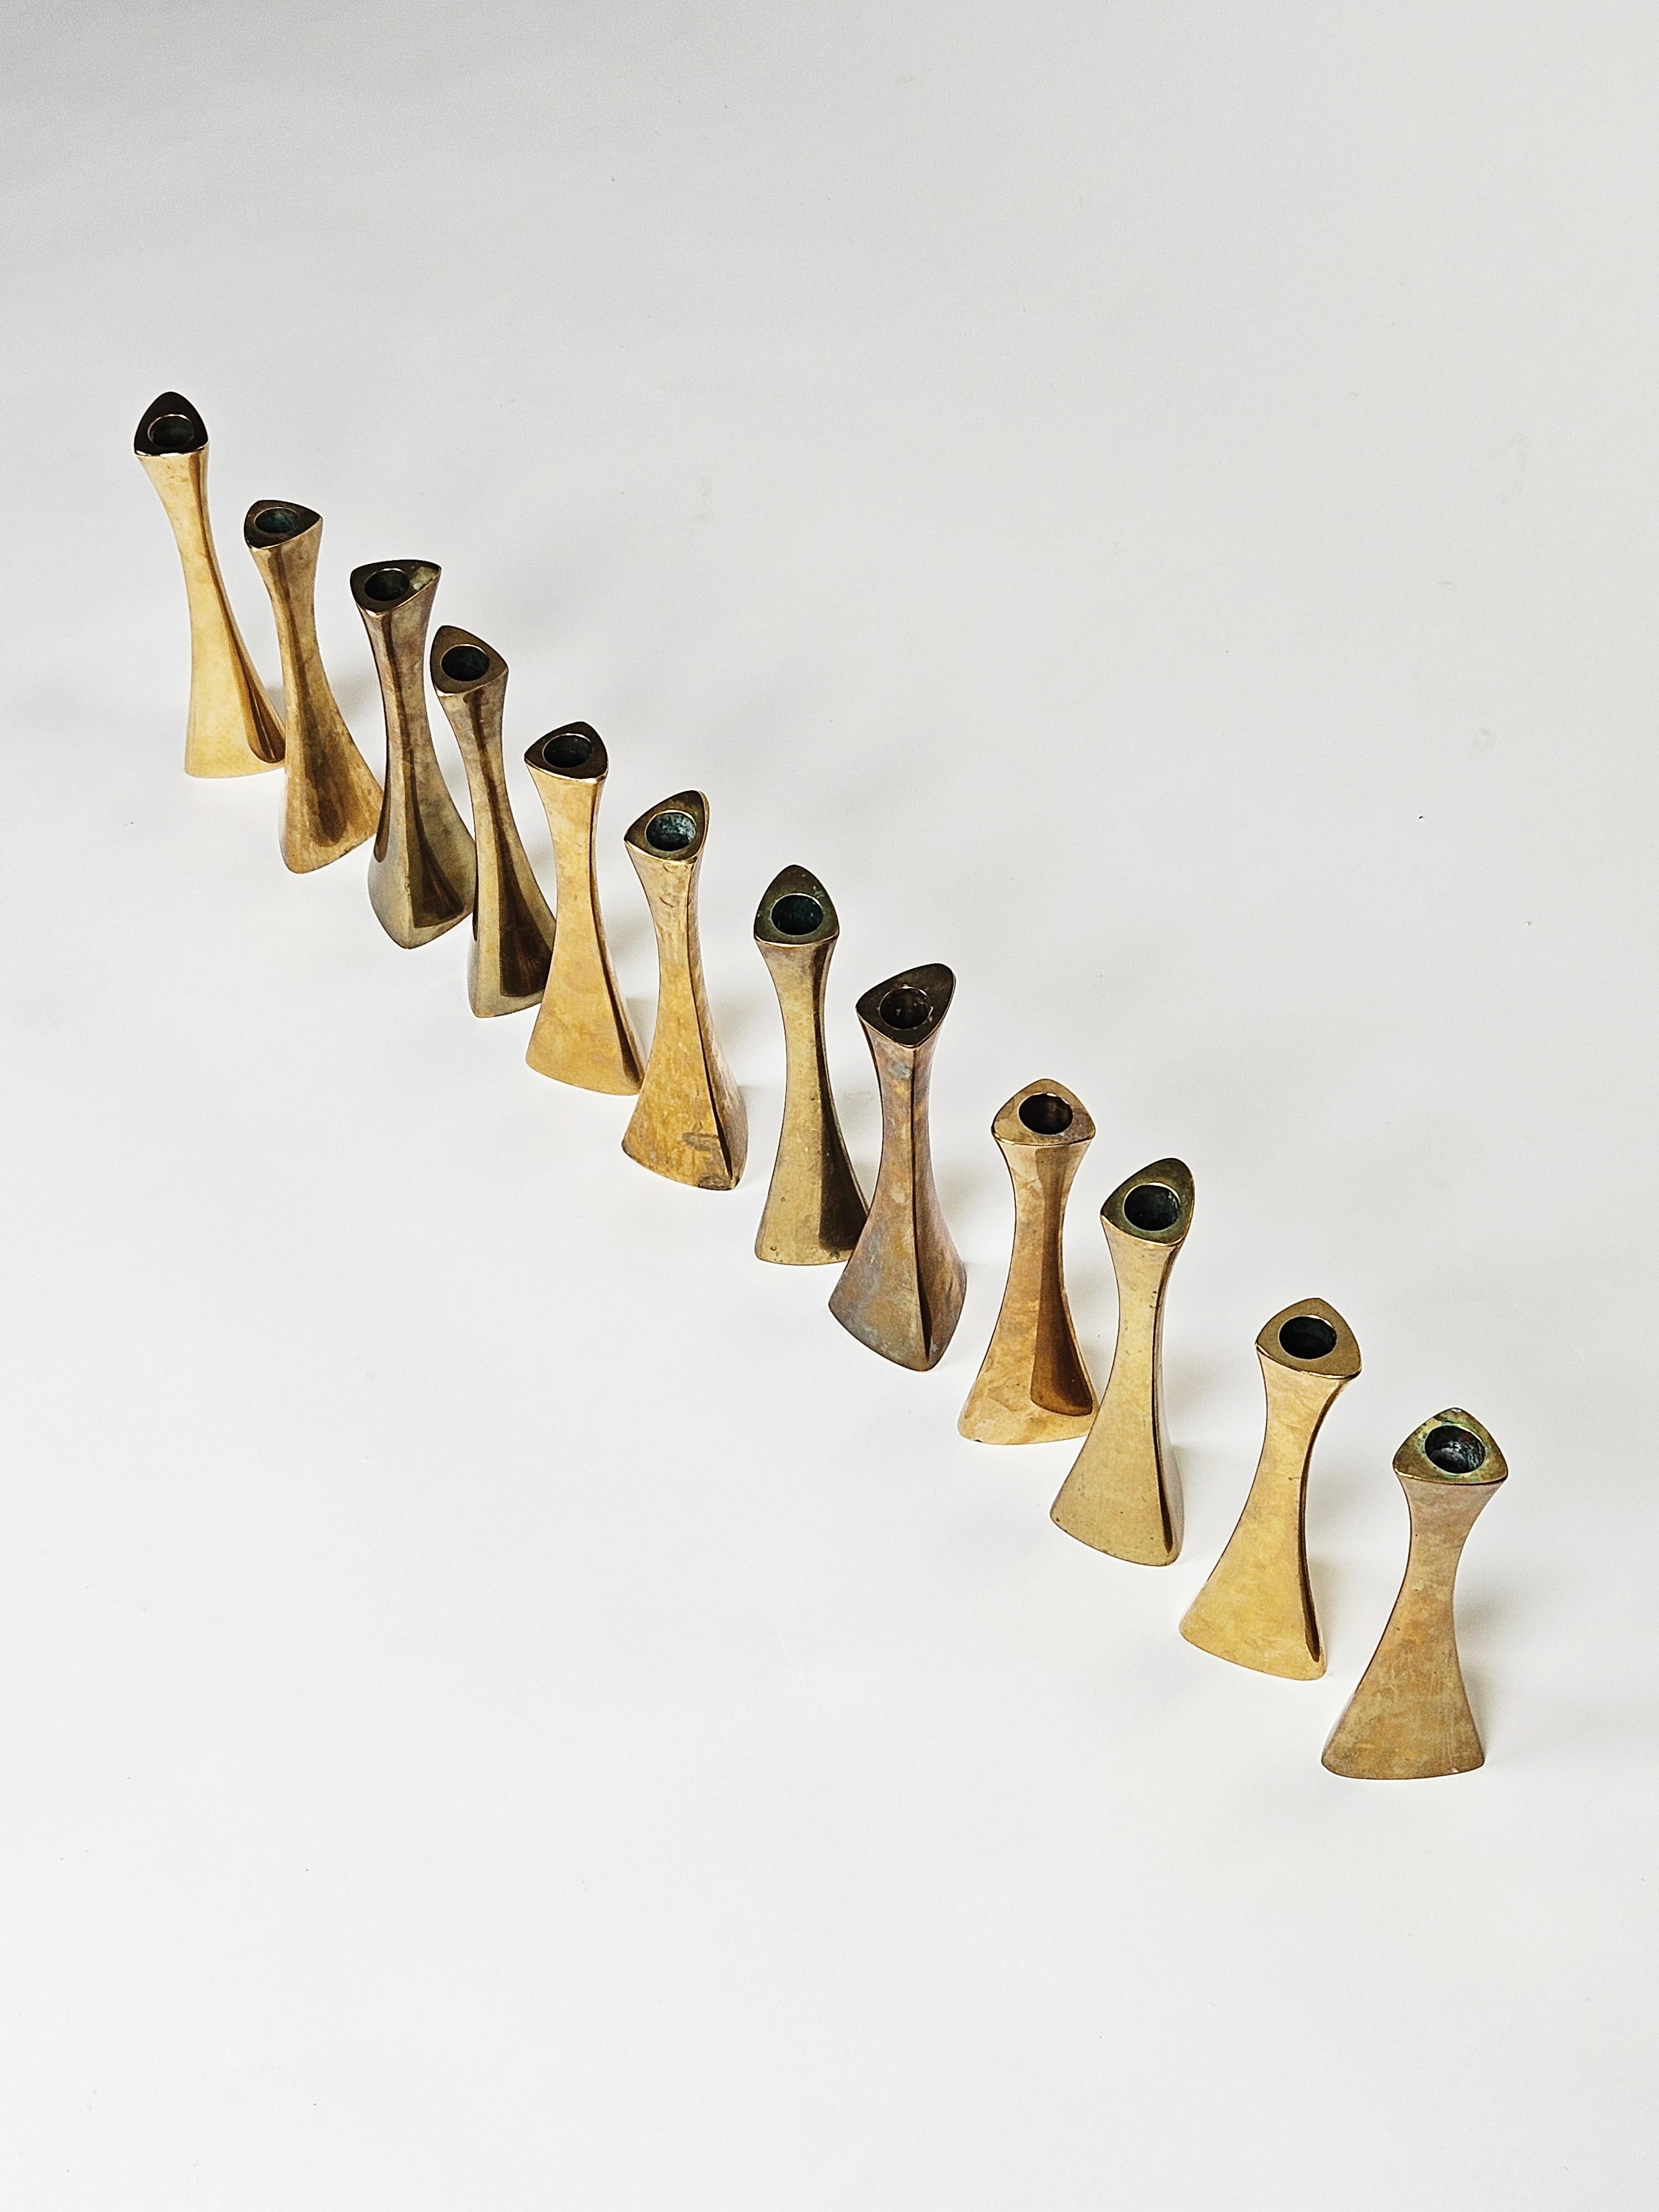 Big set of 12 candleholders model 4973 in solid brass designed by K. E. Ytterberg for BCA Eskilstuna, Sweden, during the 1960s.

Organic shape and made in solid brass. 

Patinated surface. 